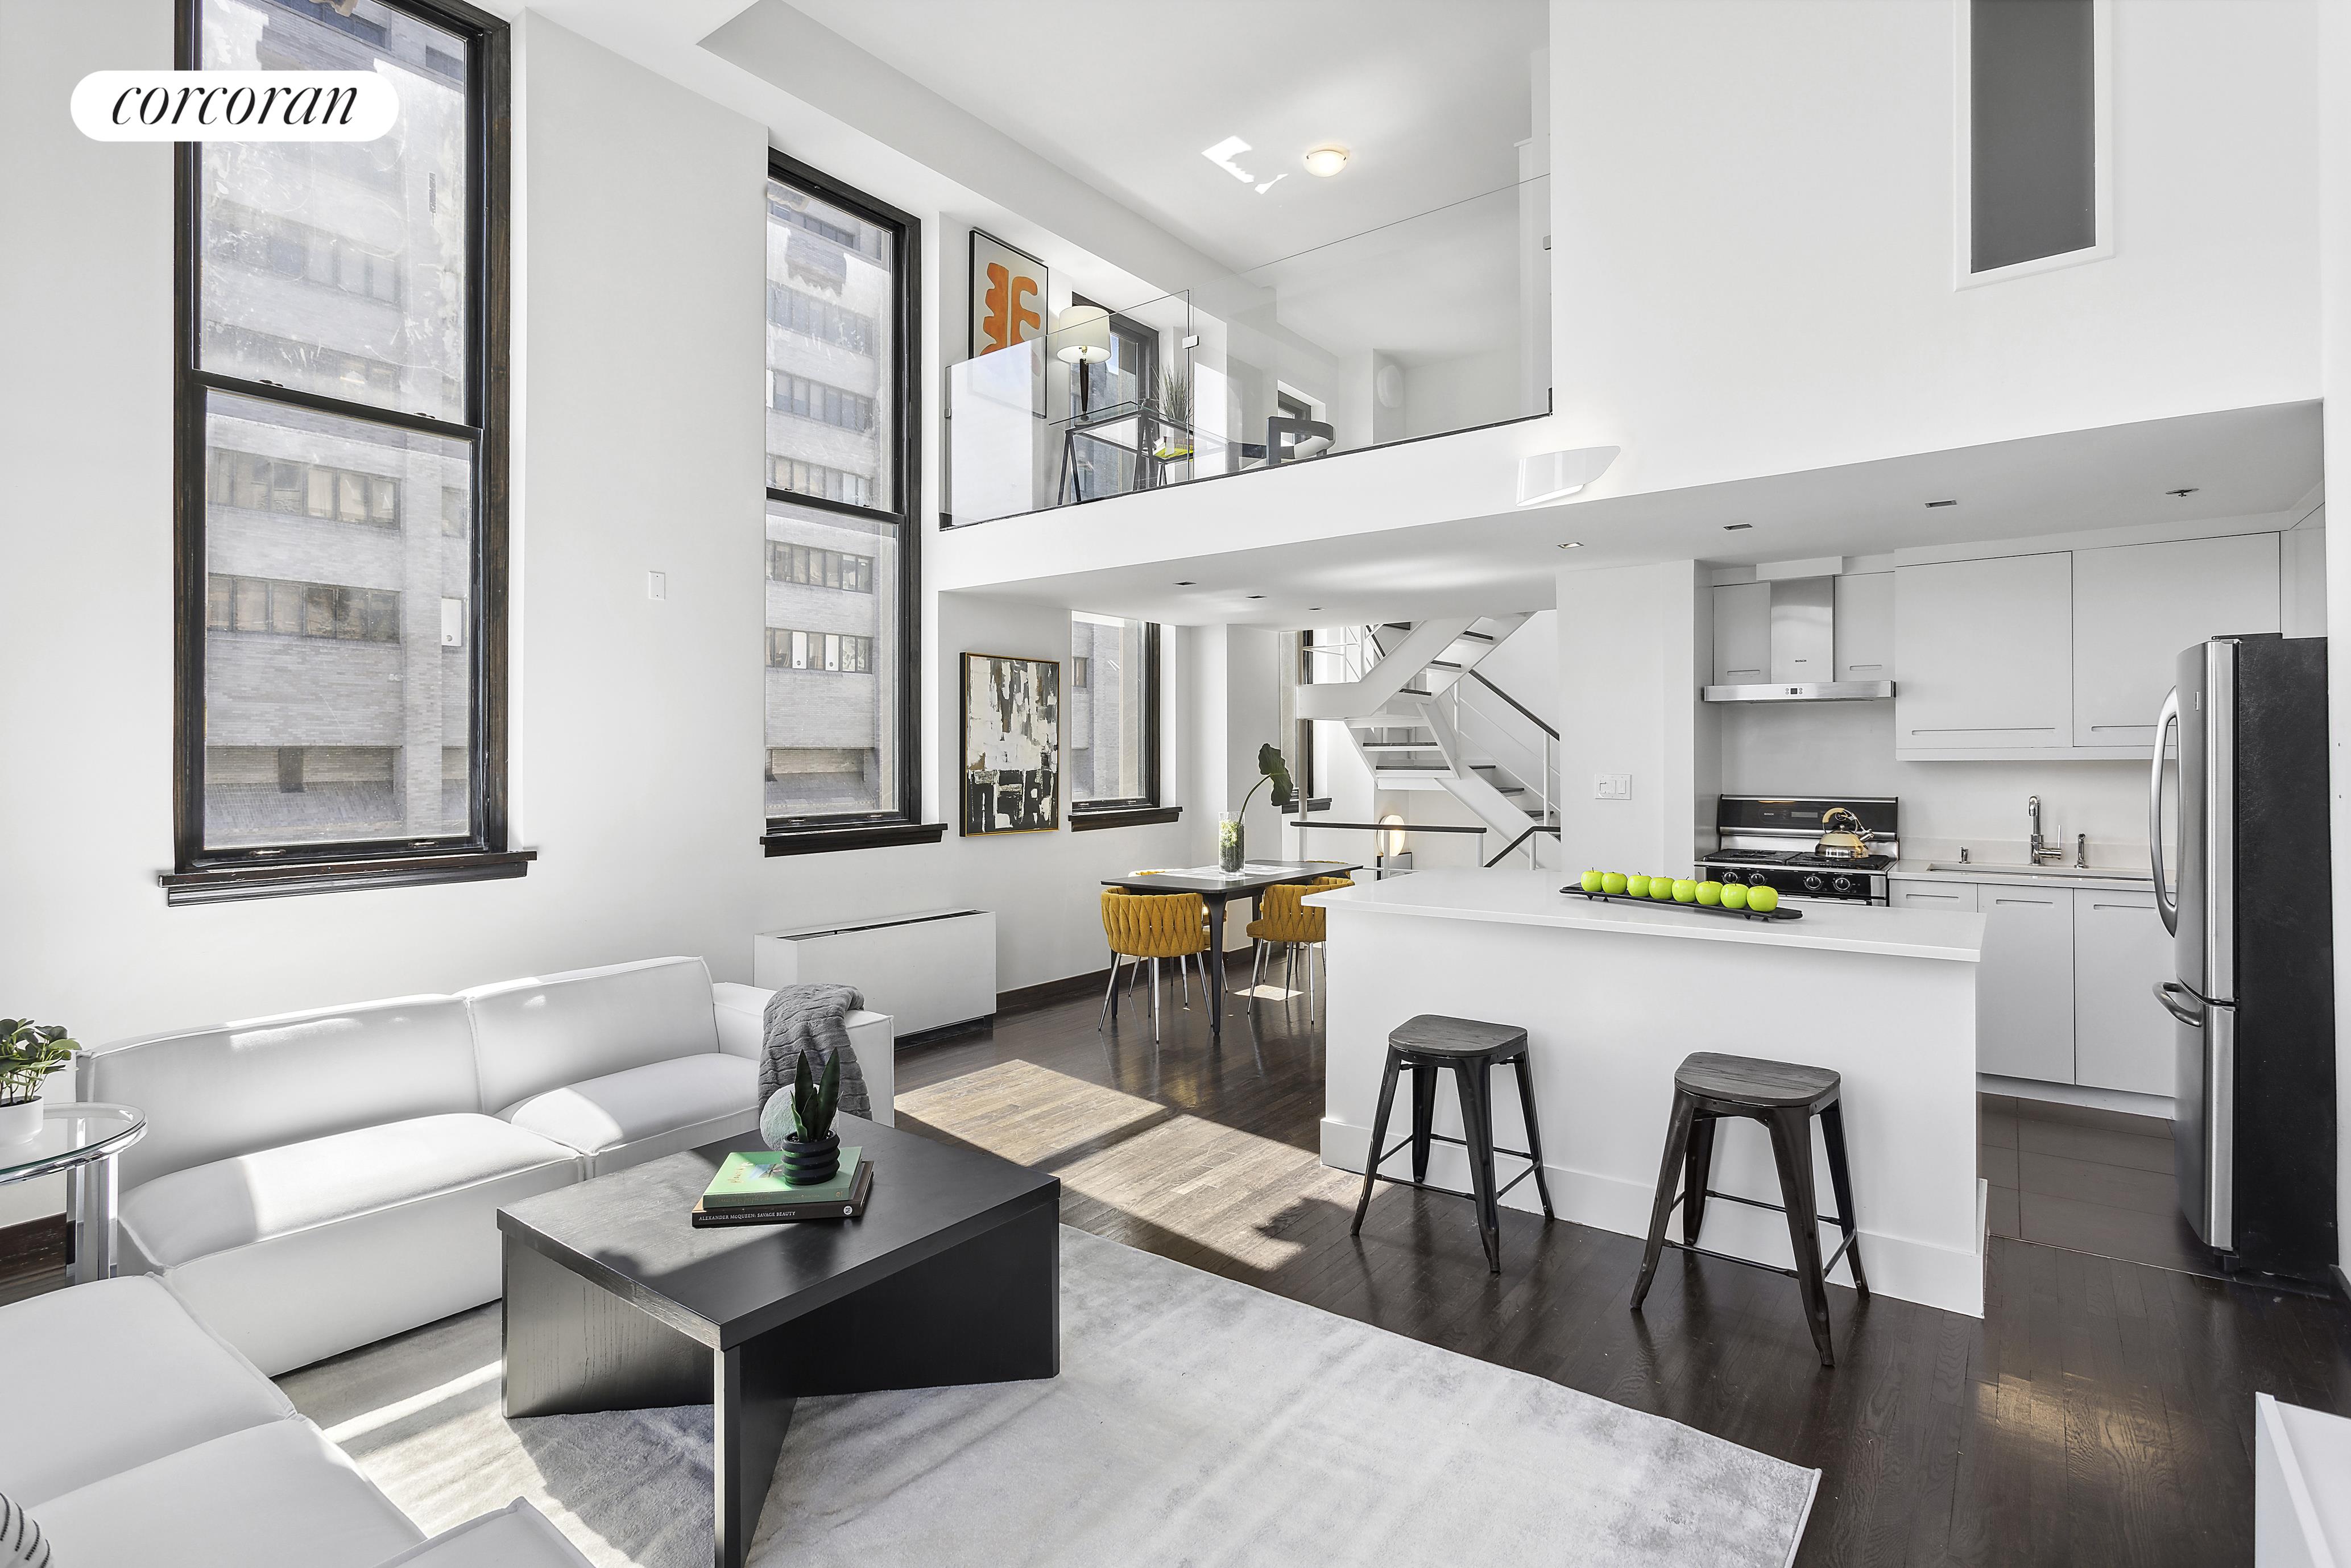 305 2nd Avenue 522, Gramercy Park, Downtown, NYC - 2 Bedrooms  
2 Bathrooms  
5 Rooms - 